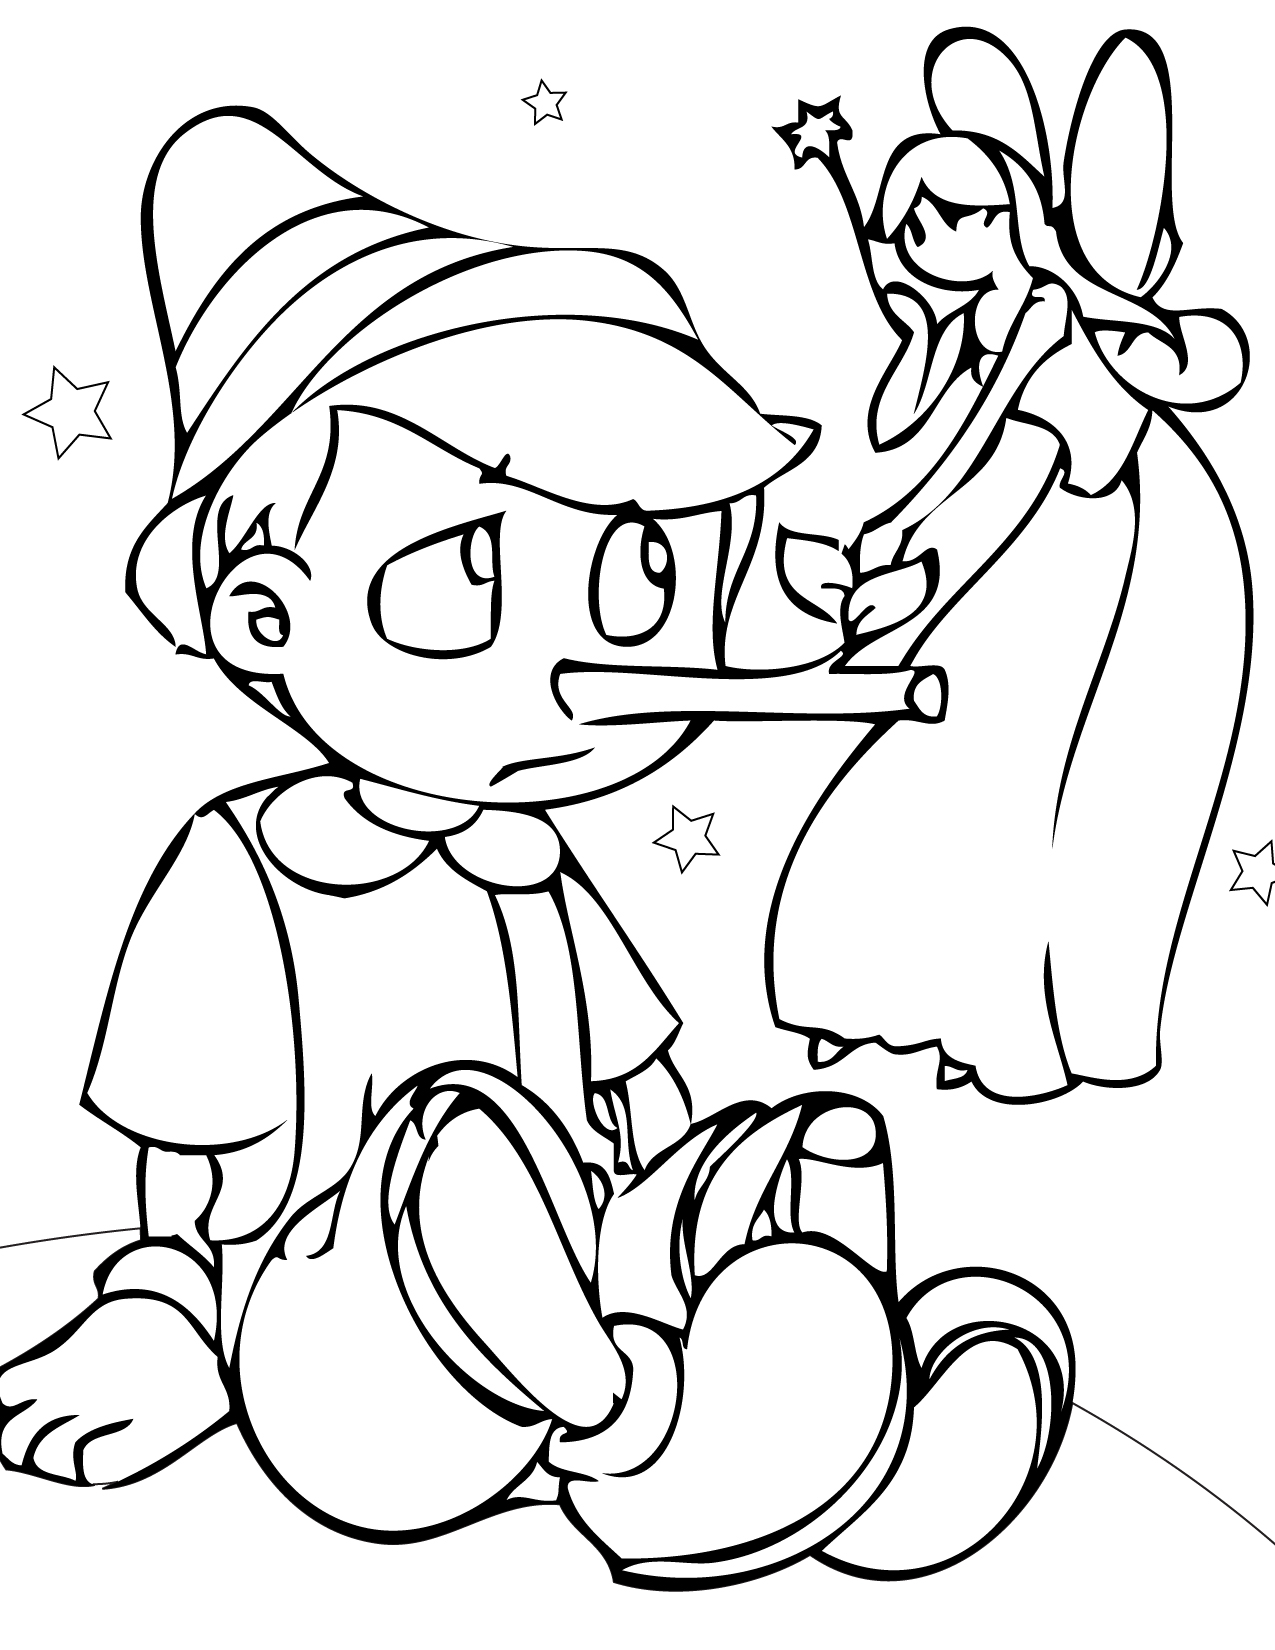 Pinnochio Coloring Pages And Games